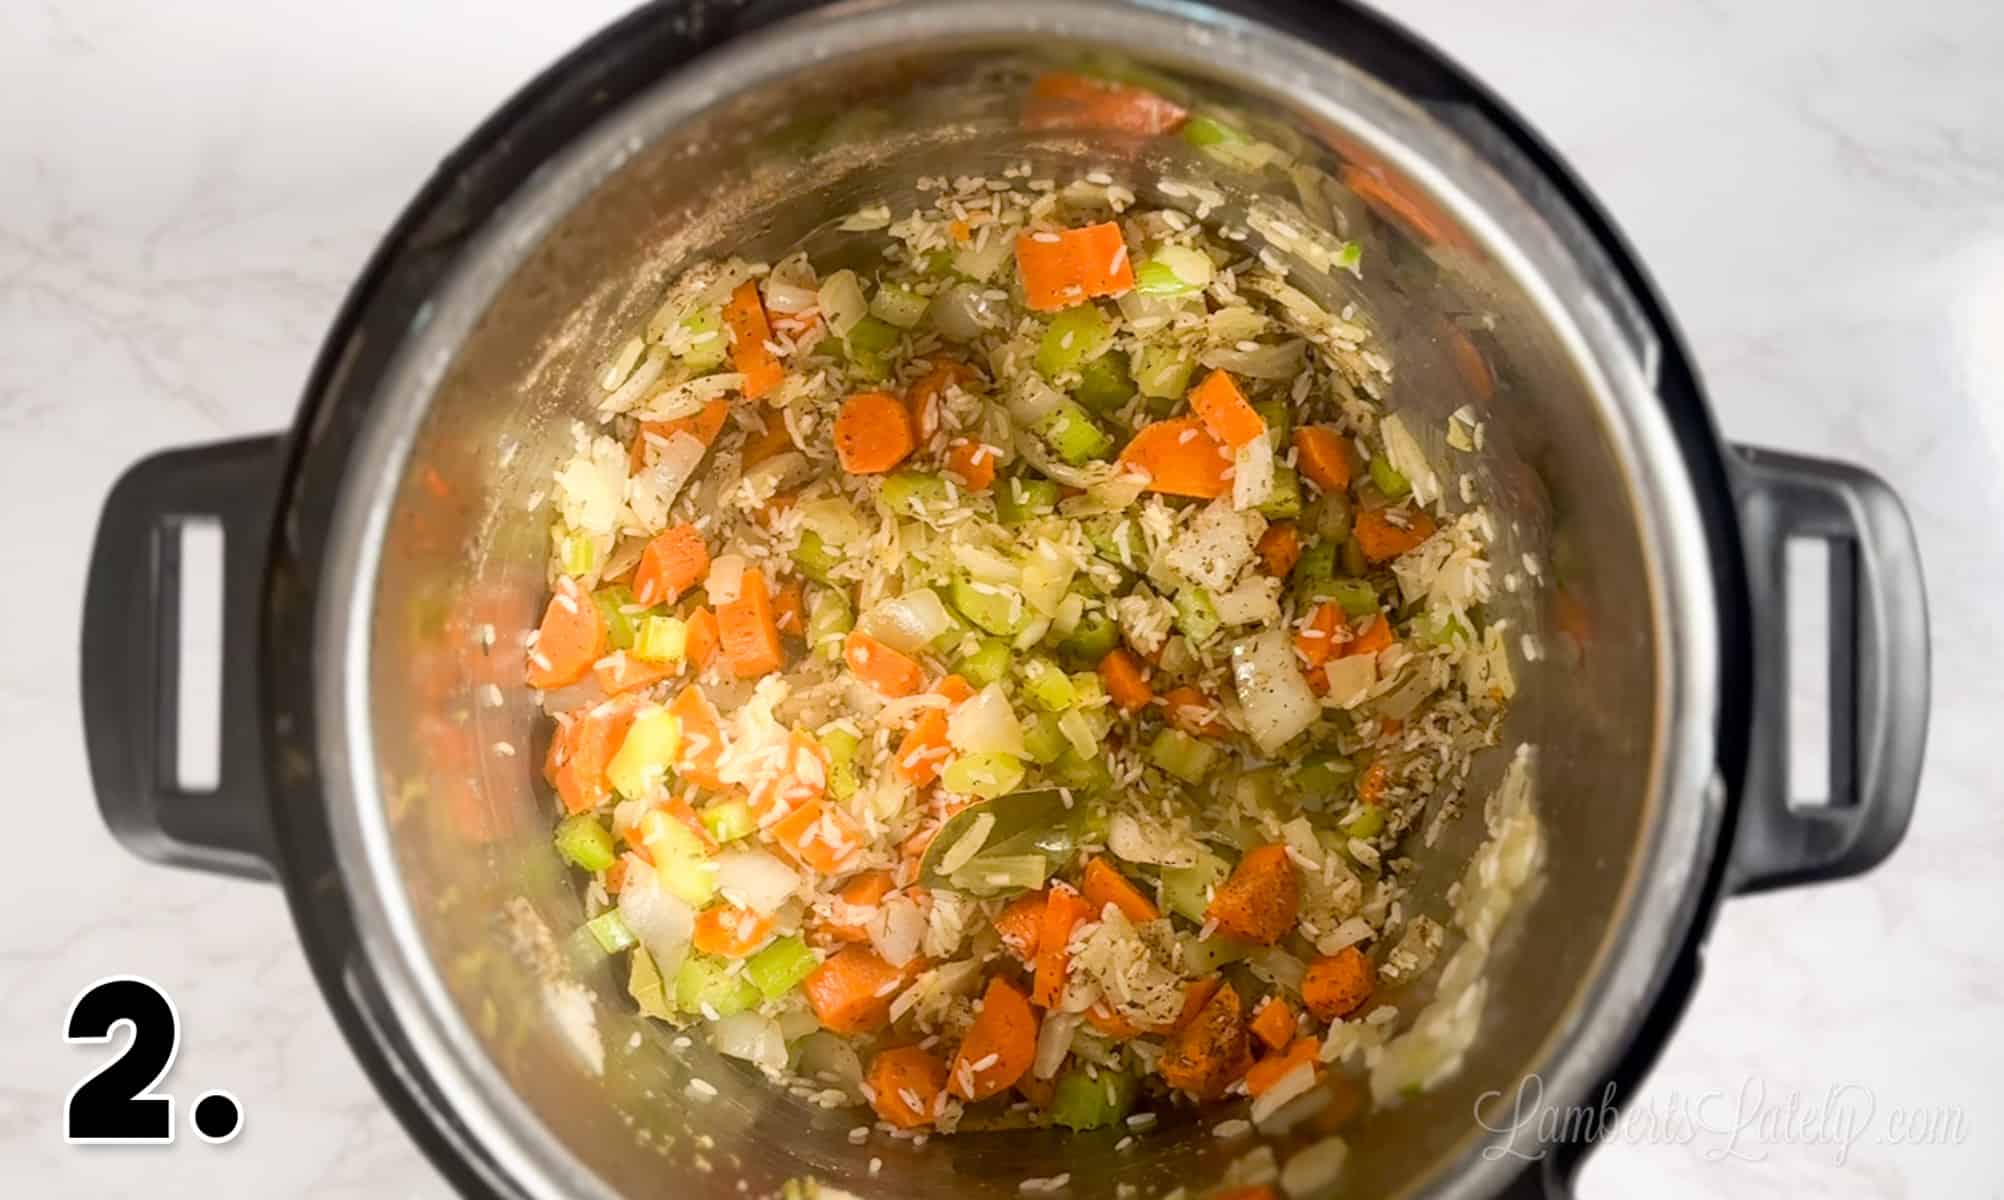 rice, veggies, and seasonings in an instant pot.